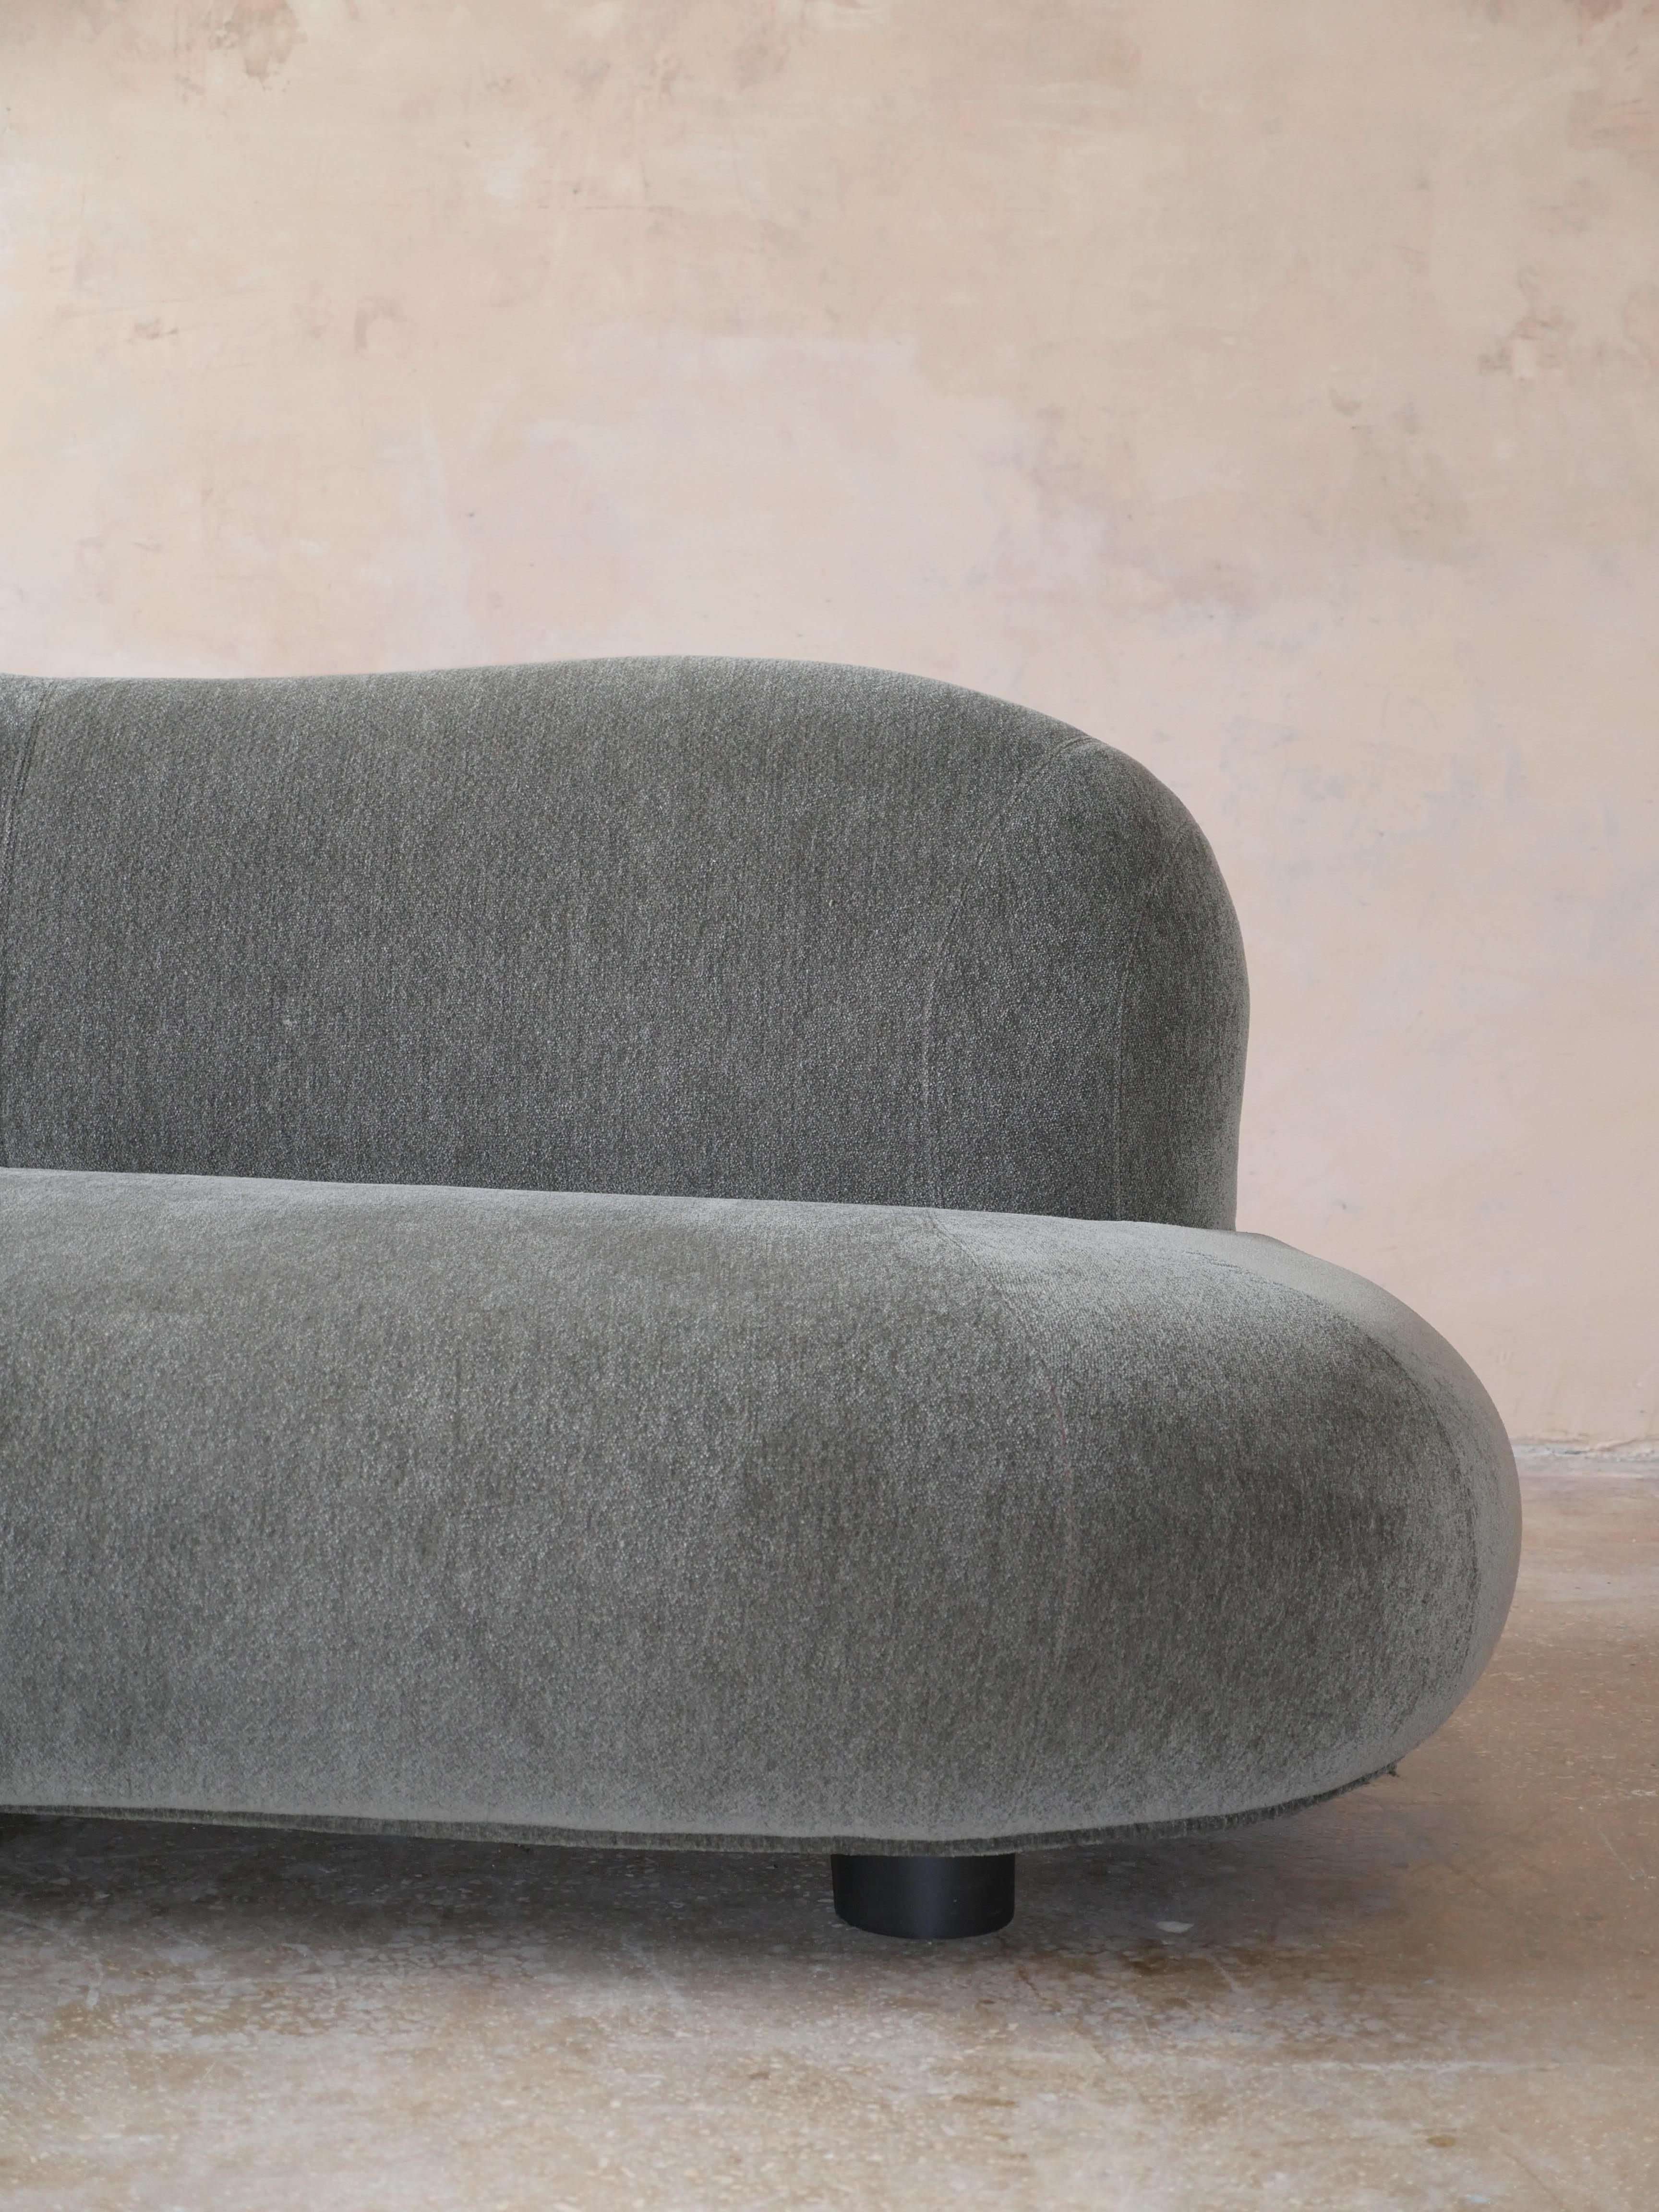 1990s, Organic Form Sofa by Preview 3